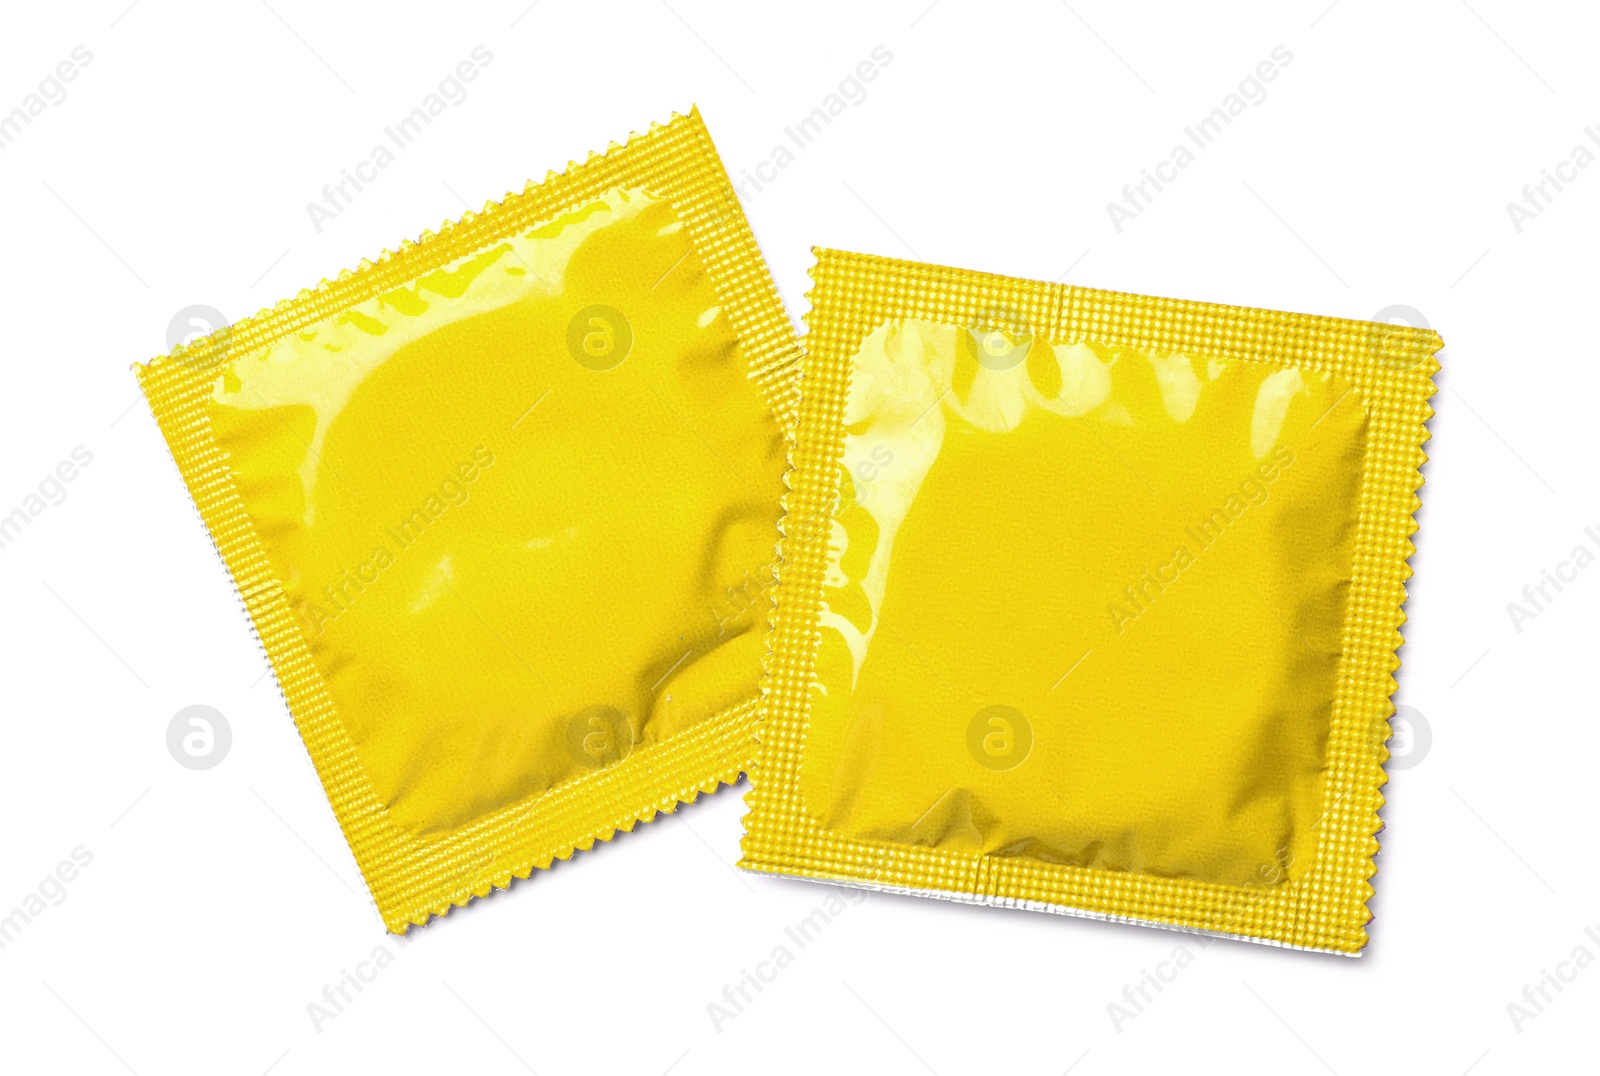 Image of Yellow condom packages on white background, top view. Safe sex